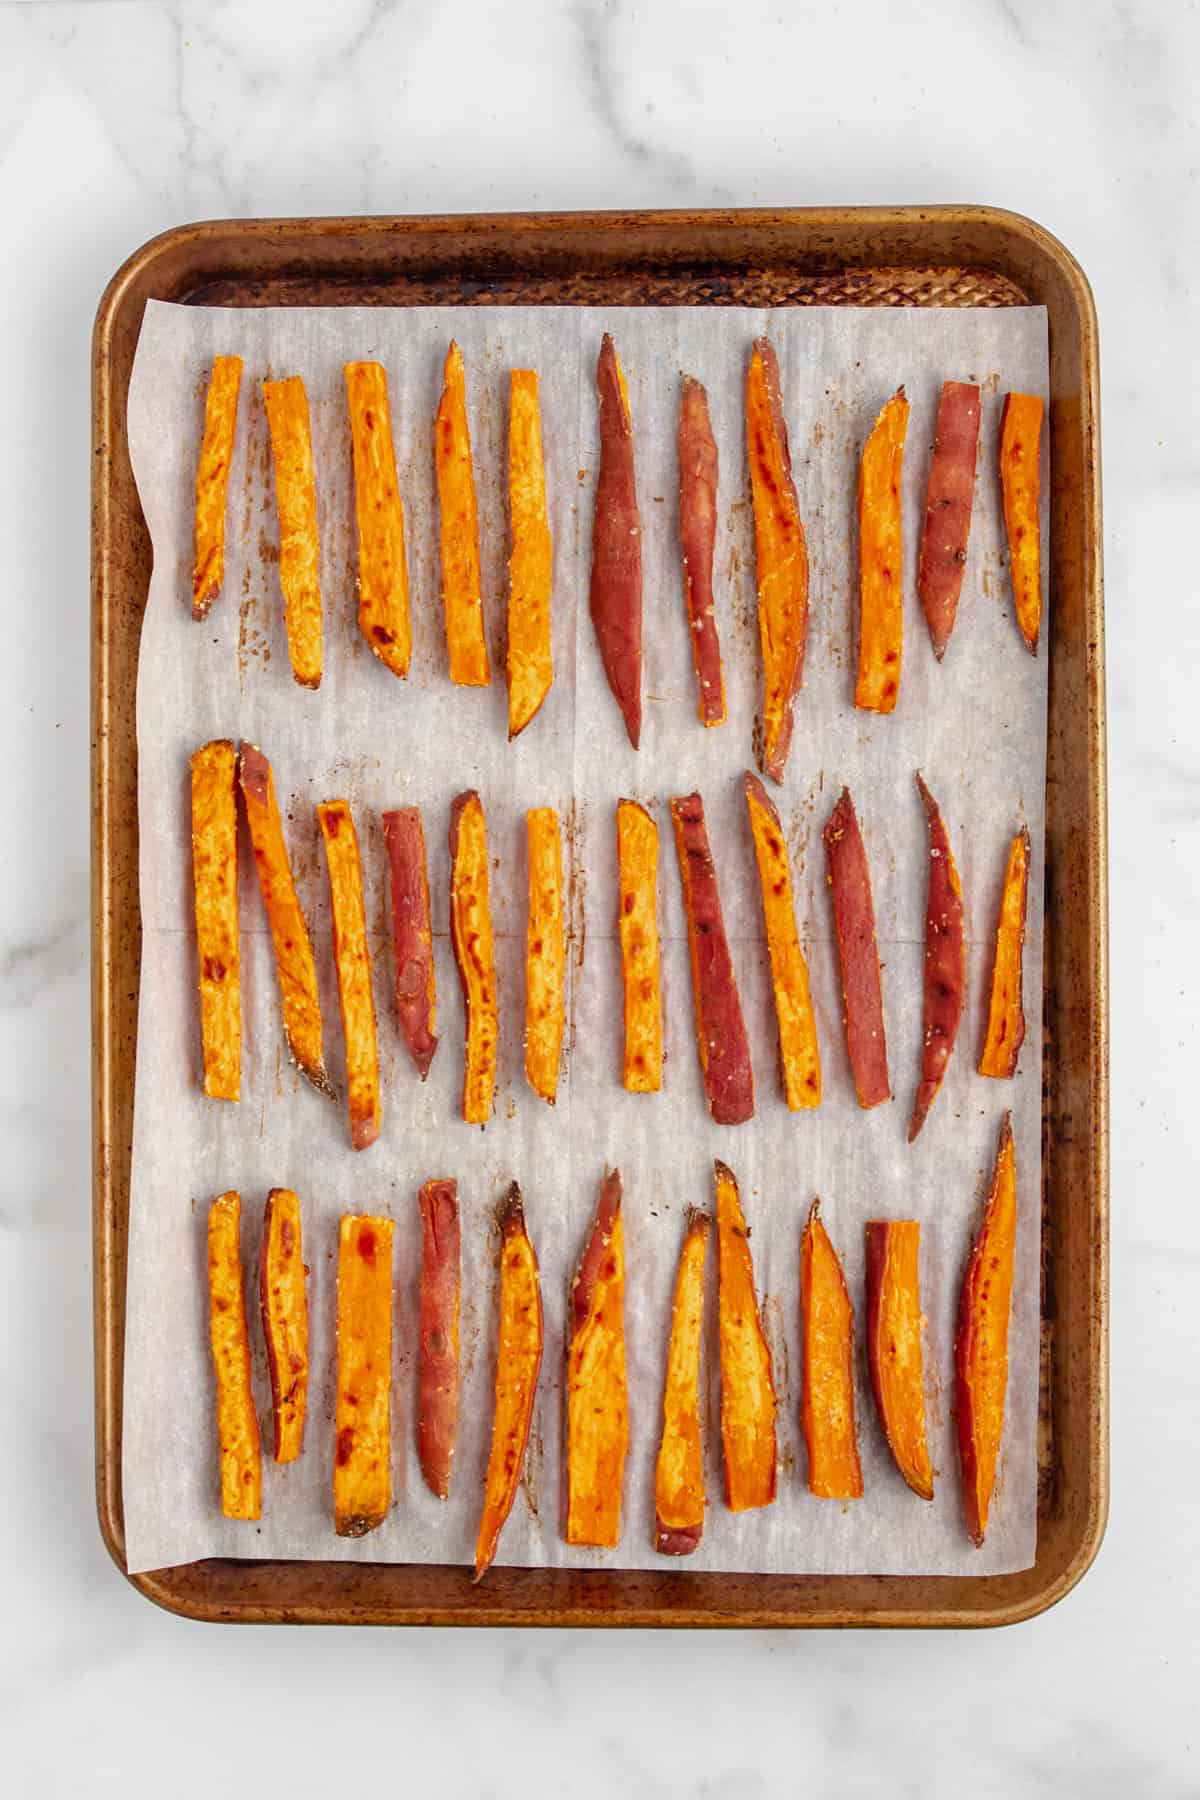 Baked sweet potato fries on a baking sheet with parchment paper.